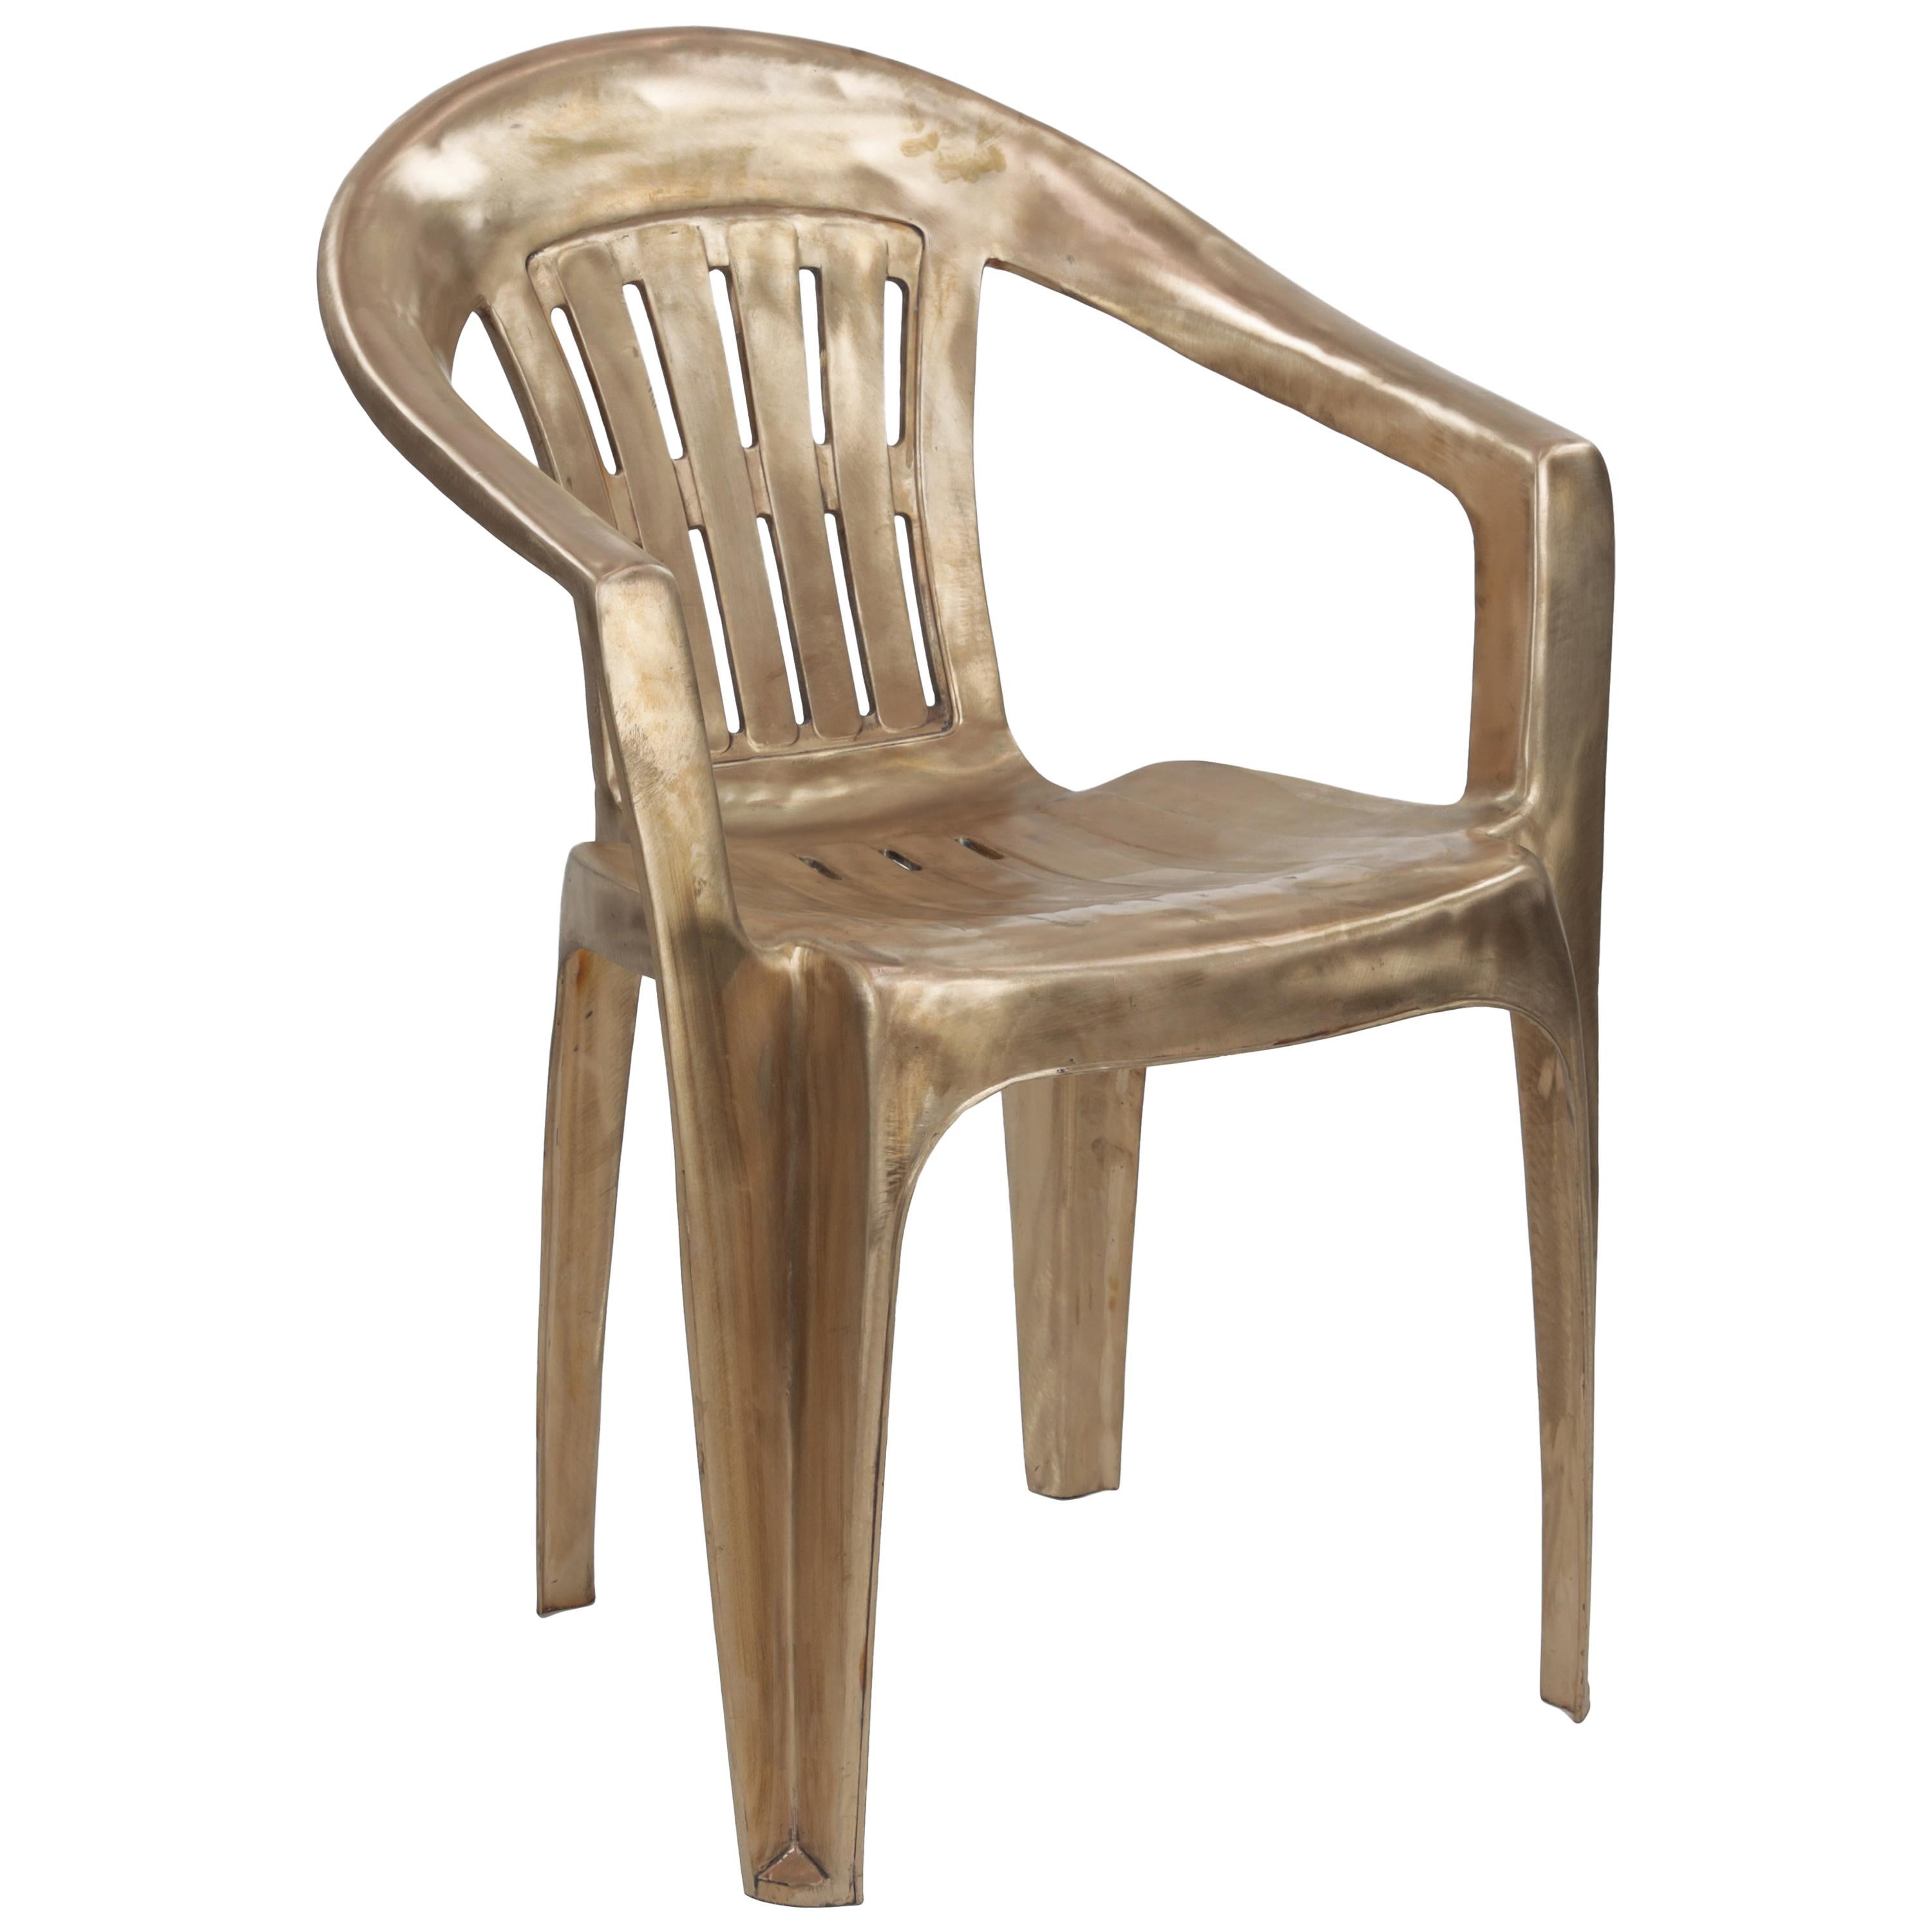 Non-Disposable Disposable Chair in Solid Bronze by Christopher Kreiling Studio